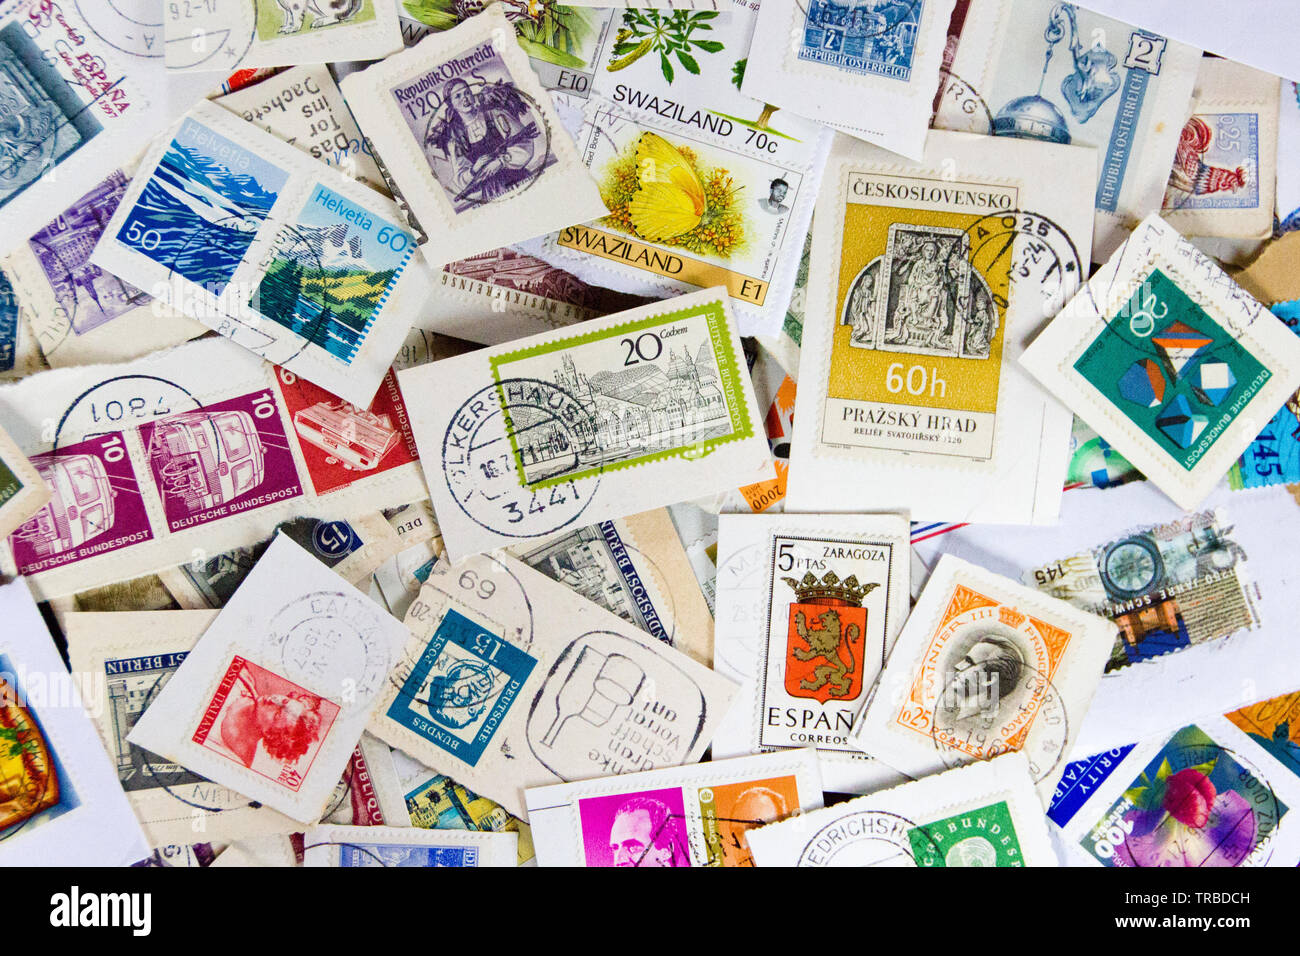 Used vintage stamp collection. Concept of philately hobby Stock Photo